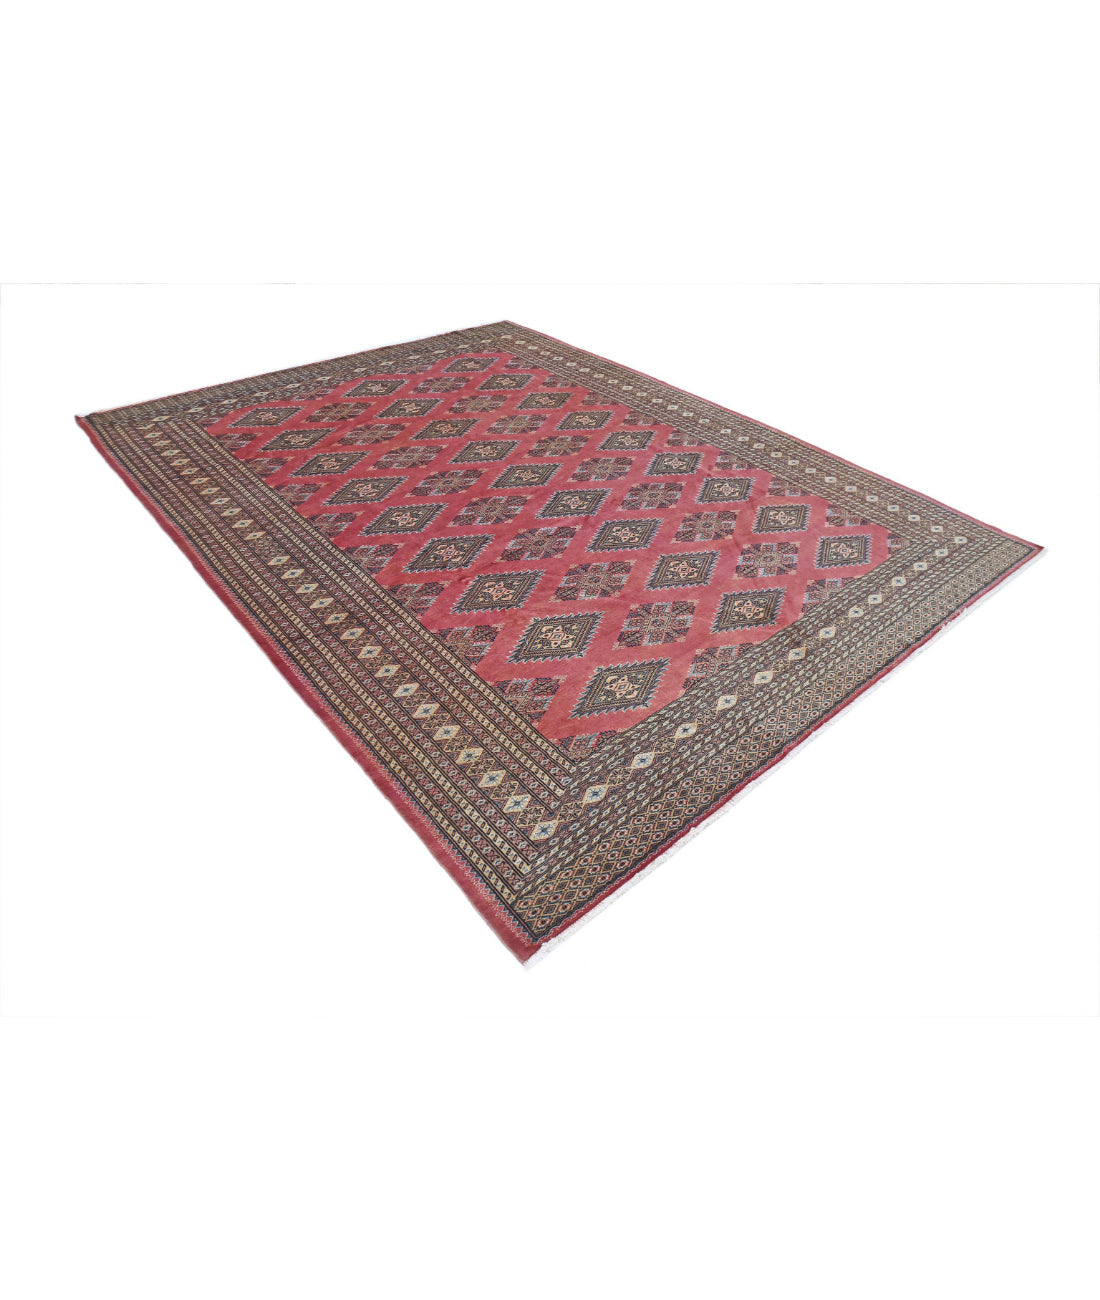 Hand Knotted Tribal Bokhara Wool Rug - 8'1'' x 10'4'' 8'1'' x 10'4'' (243 X 310) / Pink / Ivory